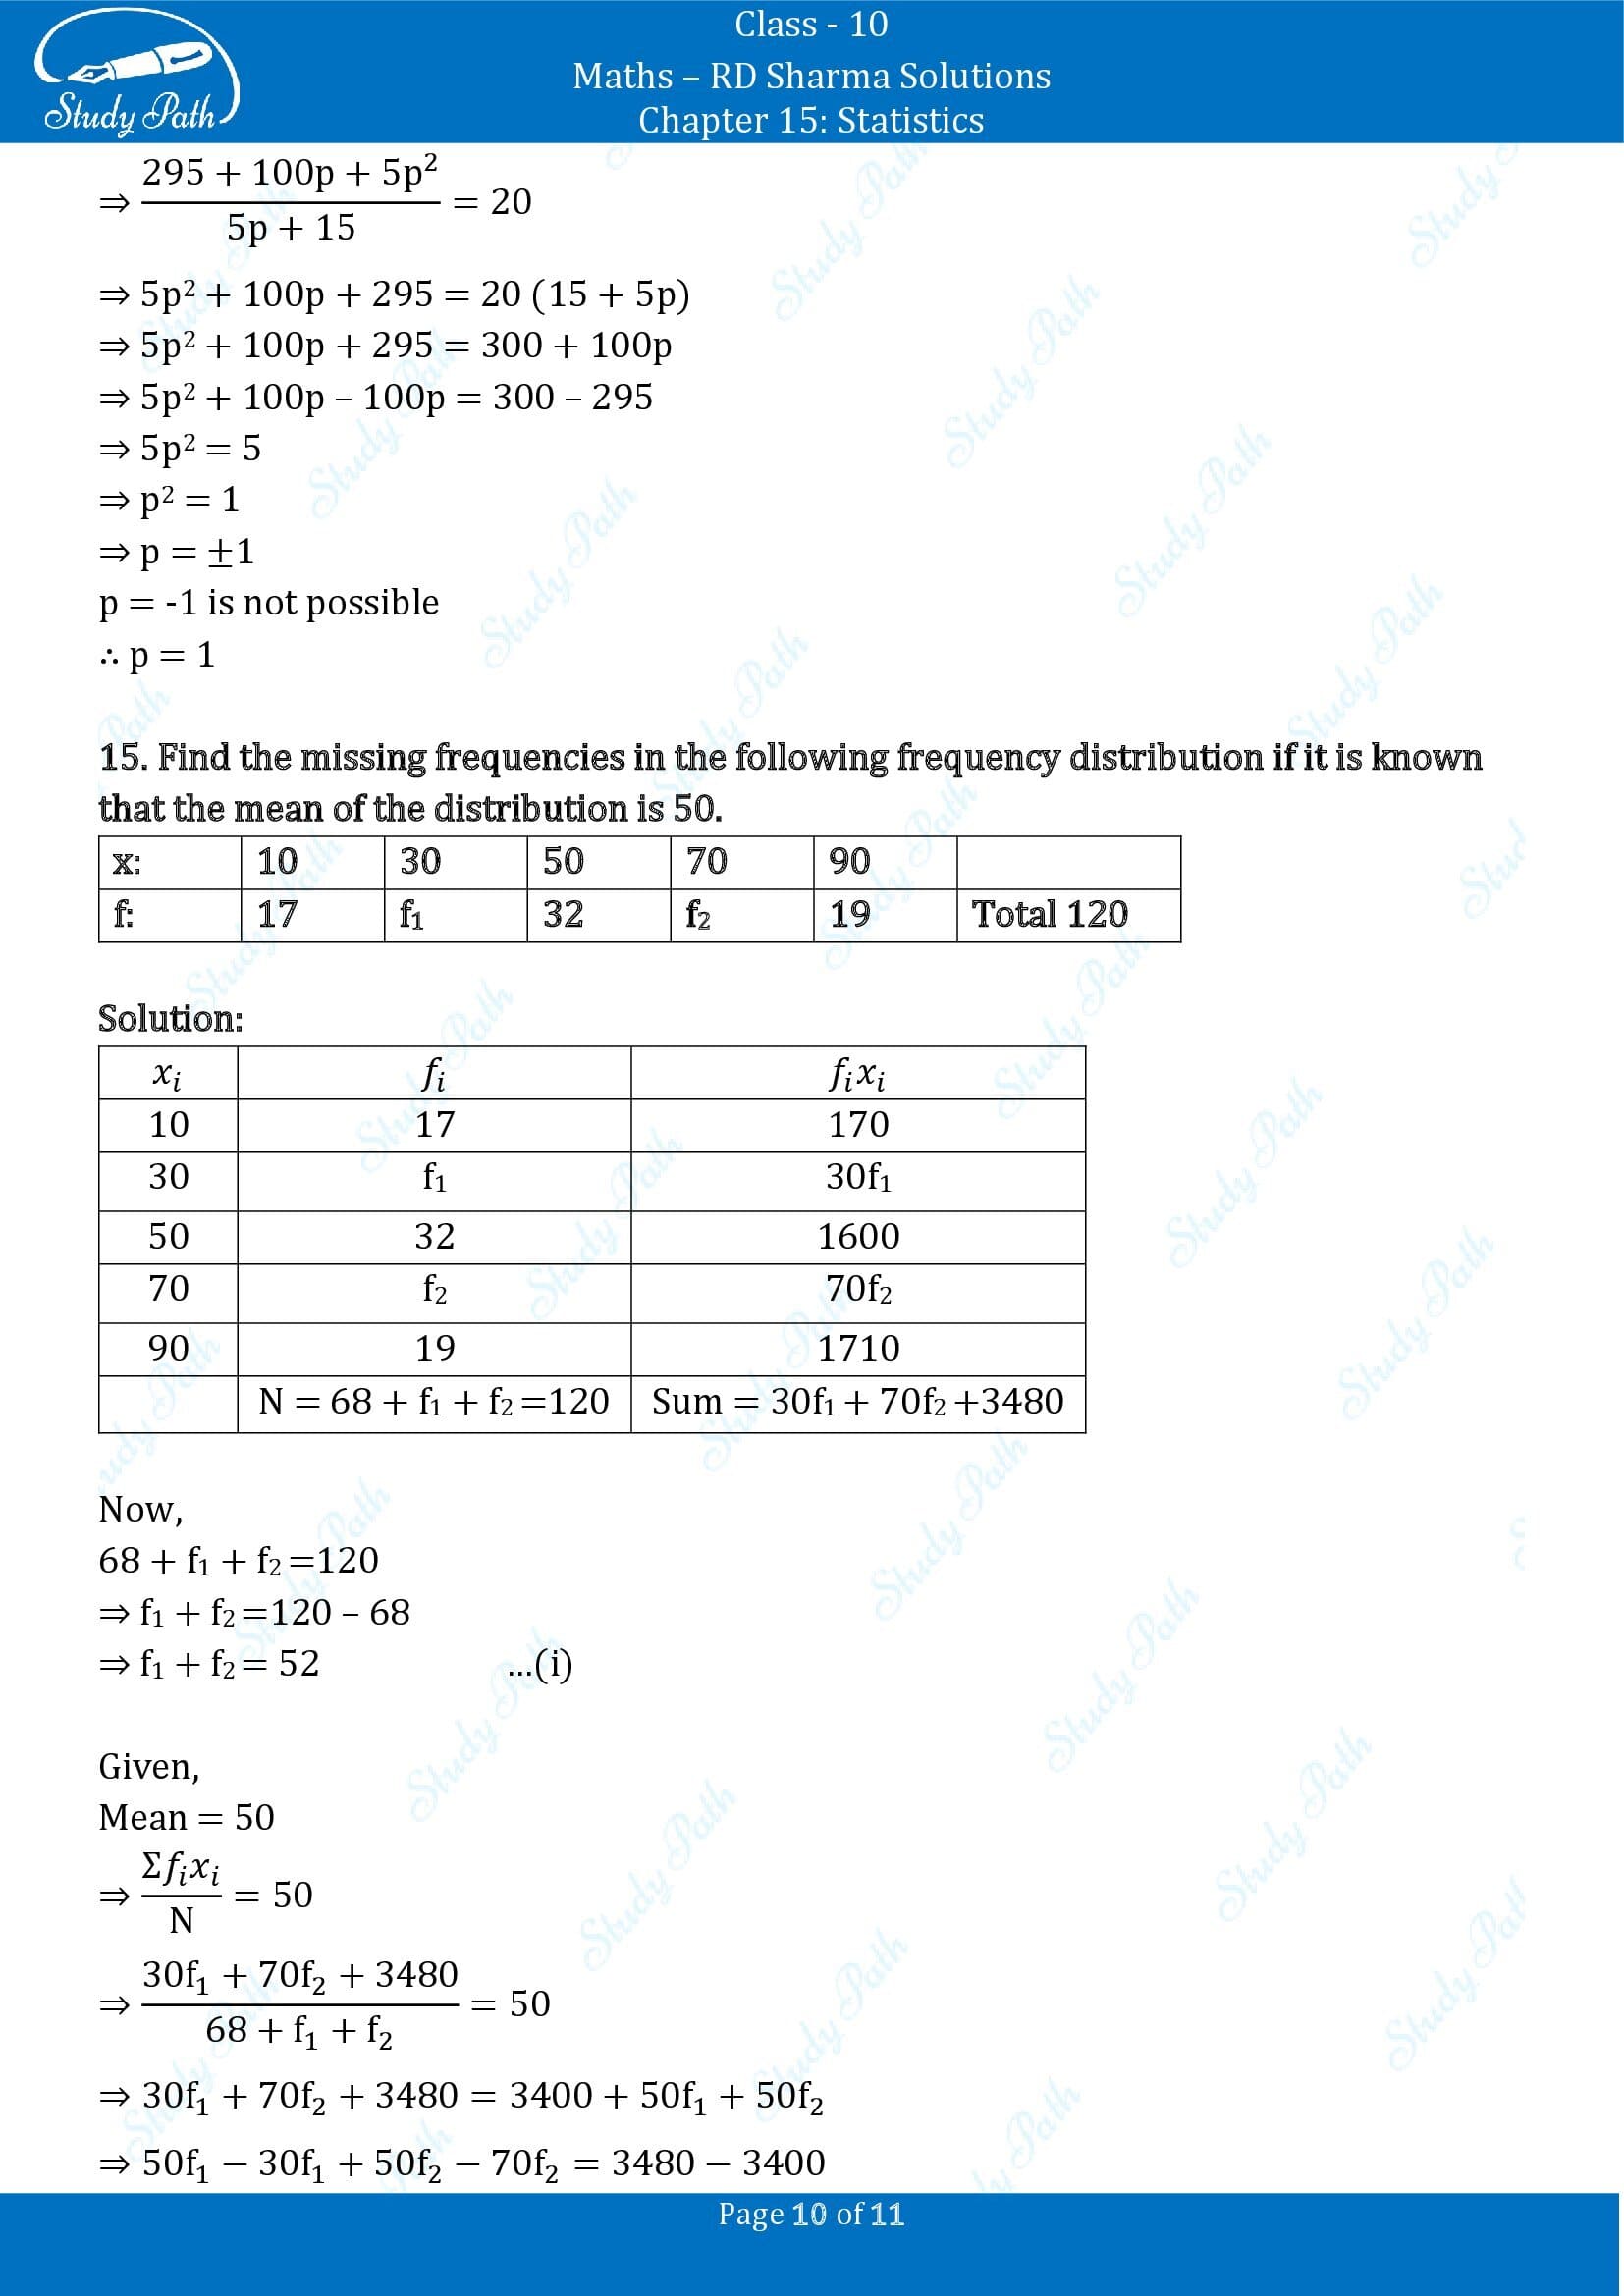 RD Sharma Solutions Class 10 Chapter 15 Statistics Exercise 15.1 00010